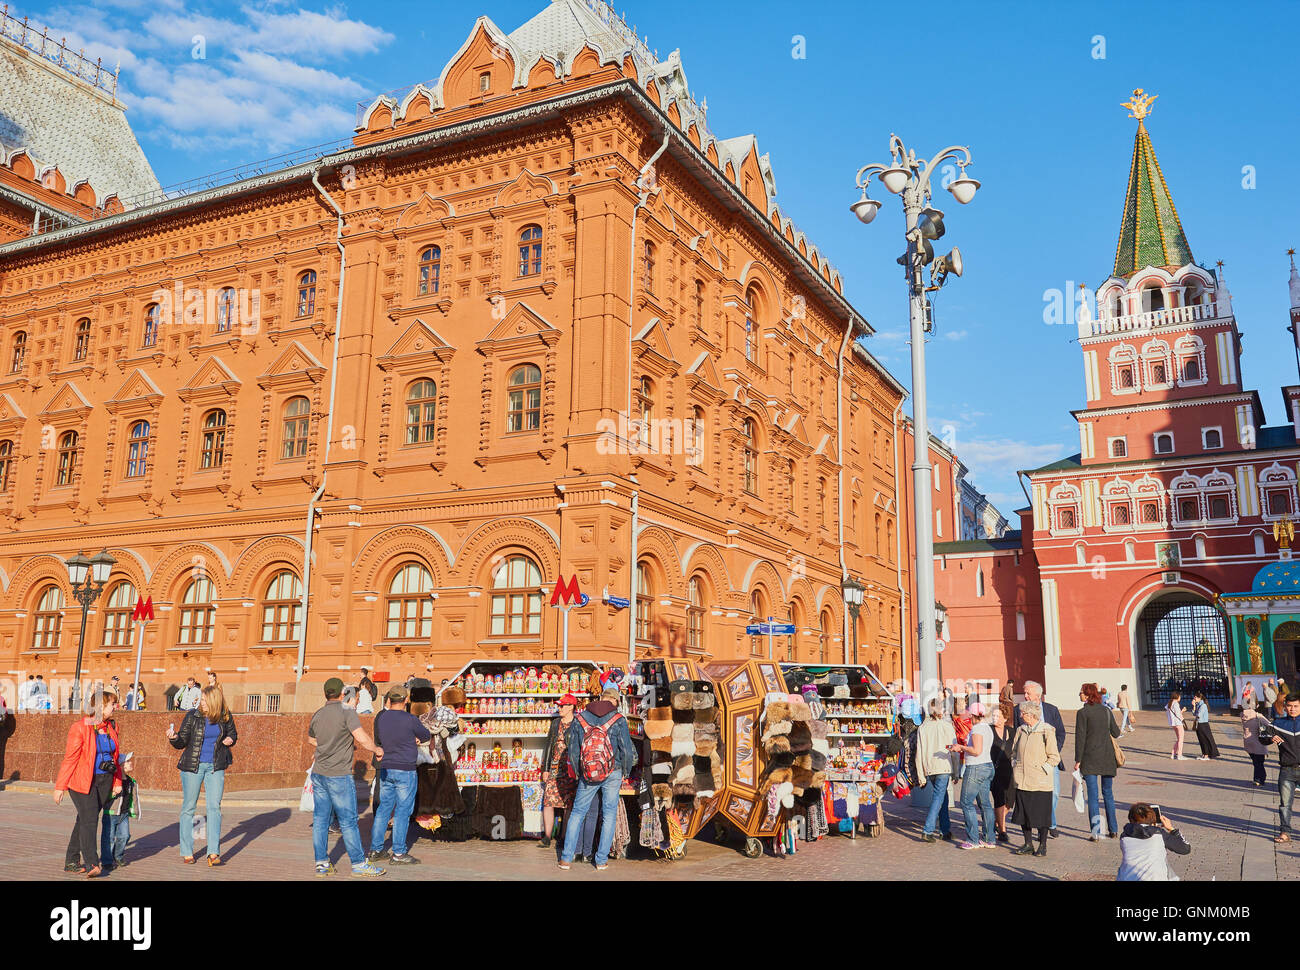 Souvenir stalls Moscow former City Hall and Resurrection or Iberian Gate, Manezhnaya or Manege Square Moscow Russia Stock Photo